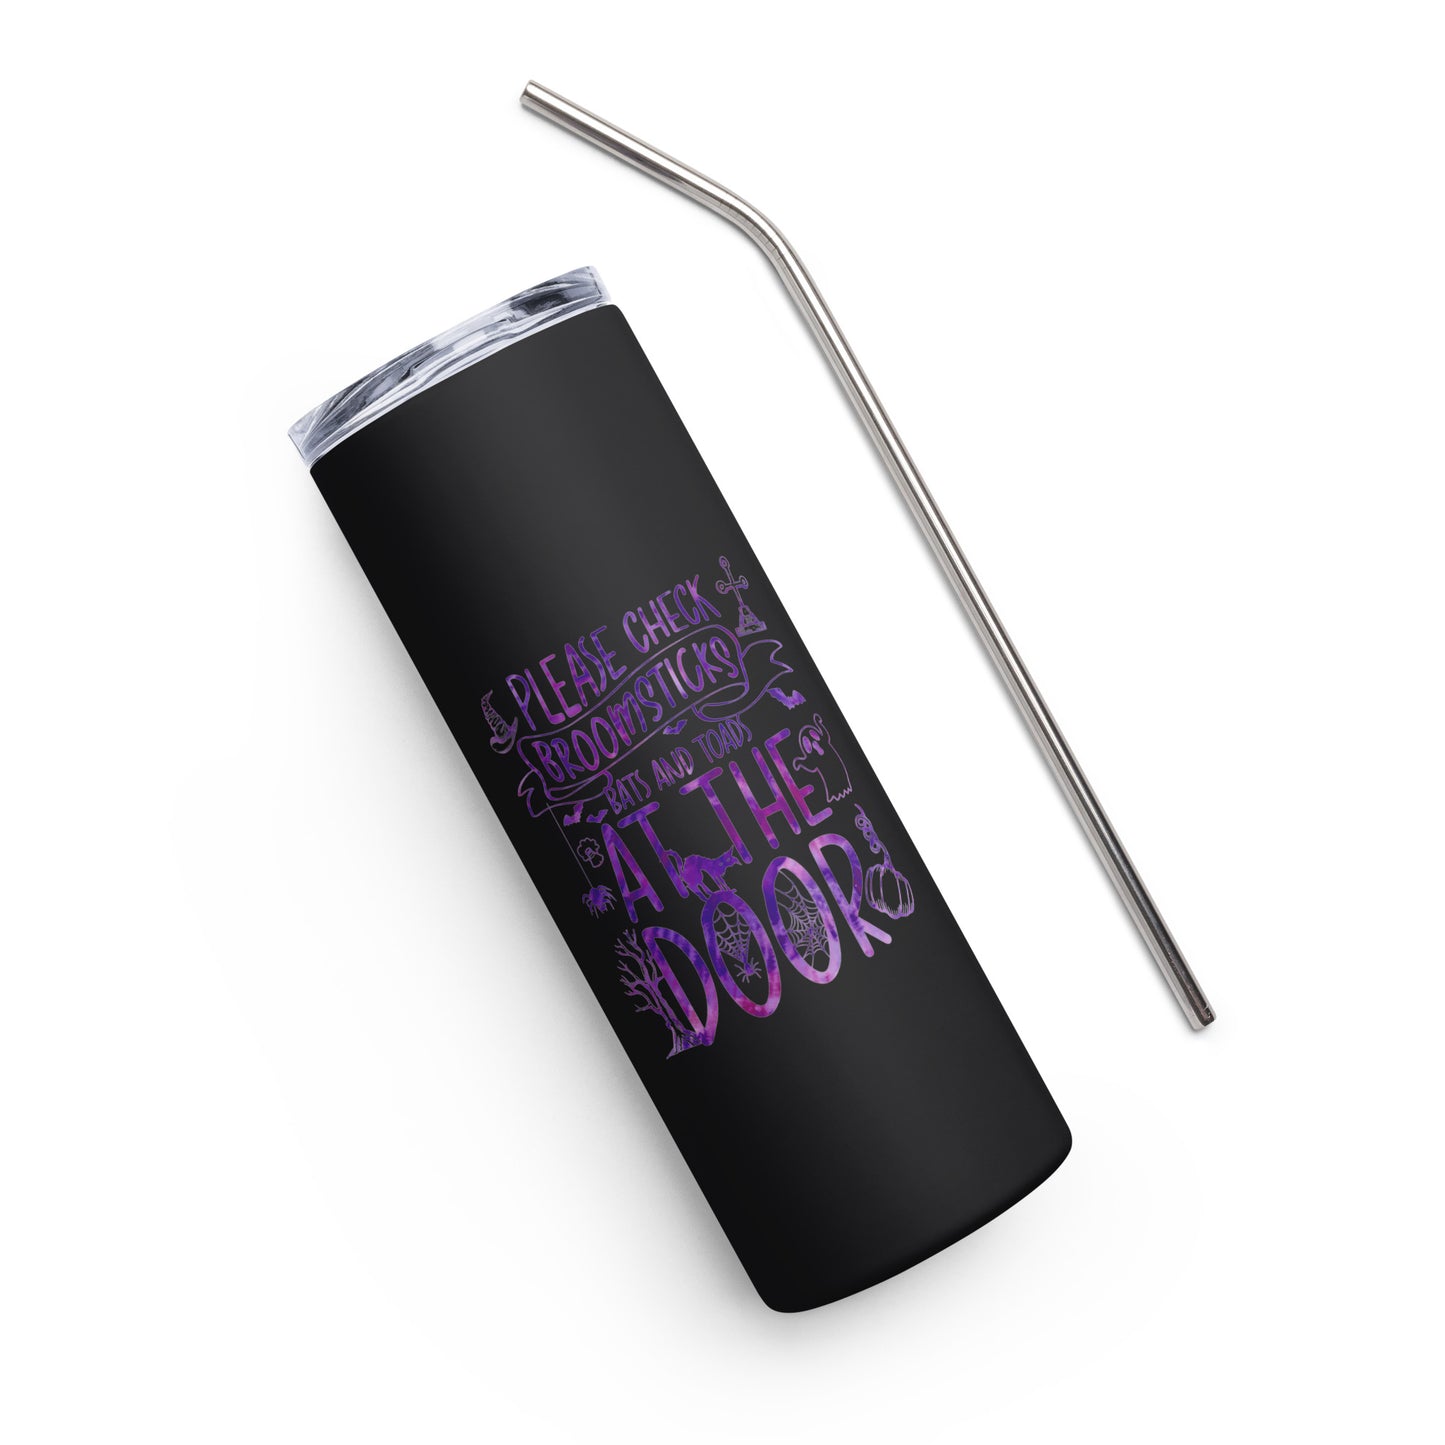 Please Check Your Broomsticks, Bats and Toads at the Door Stainless steel tumbler